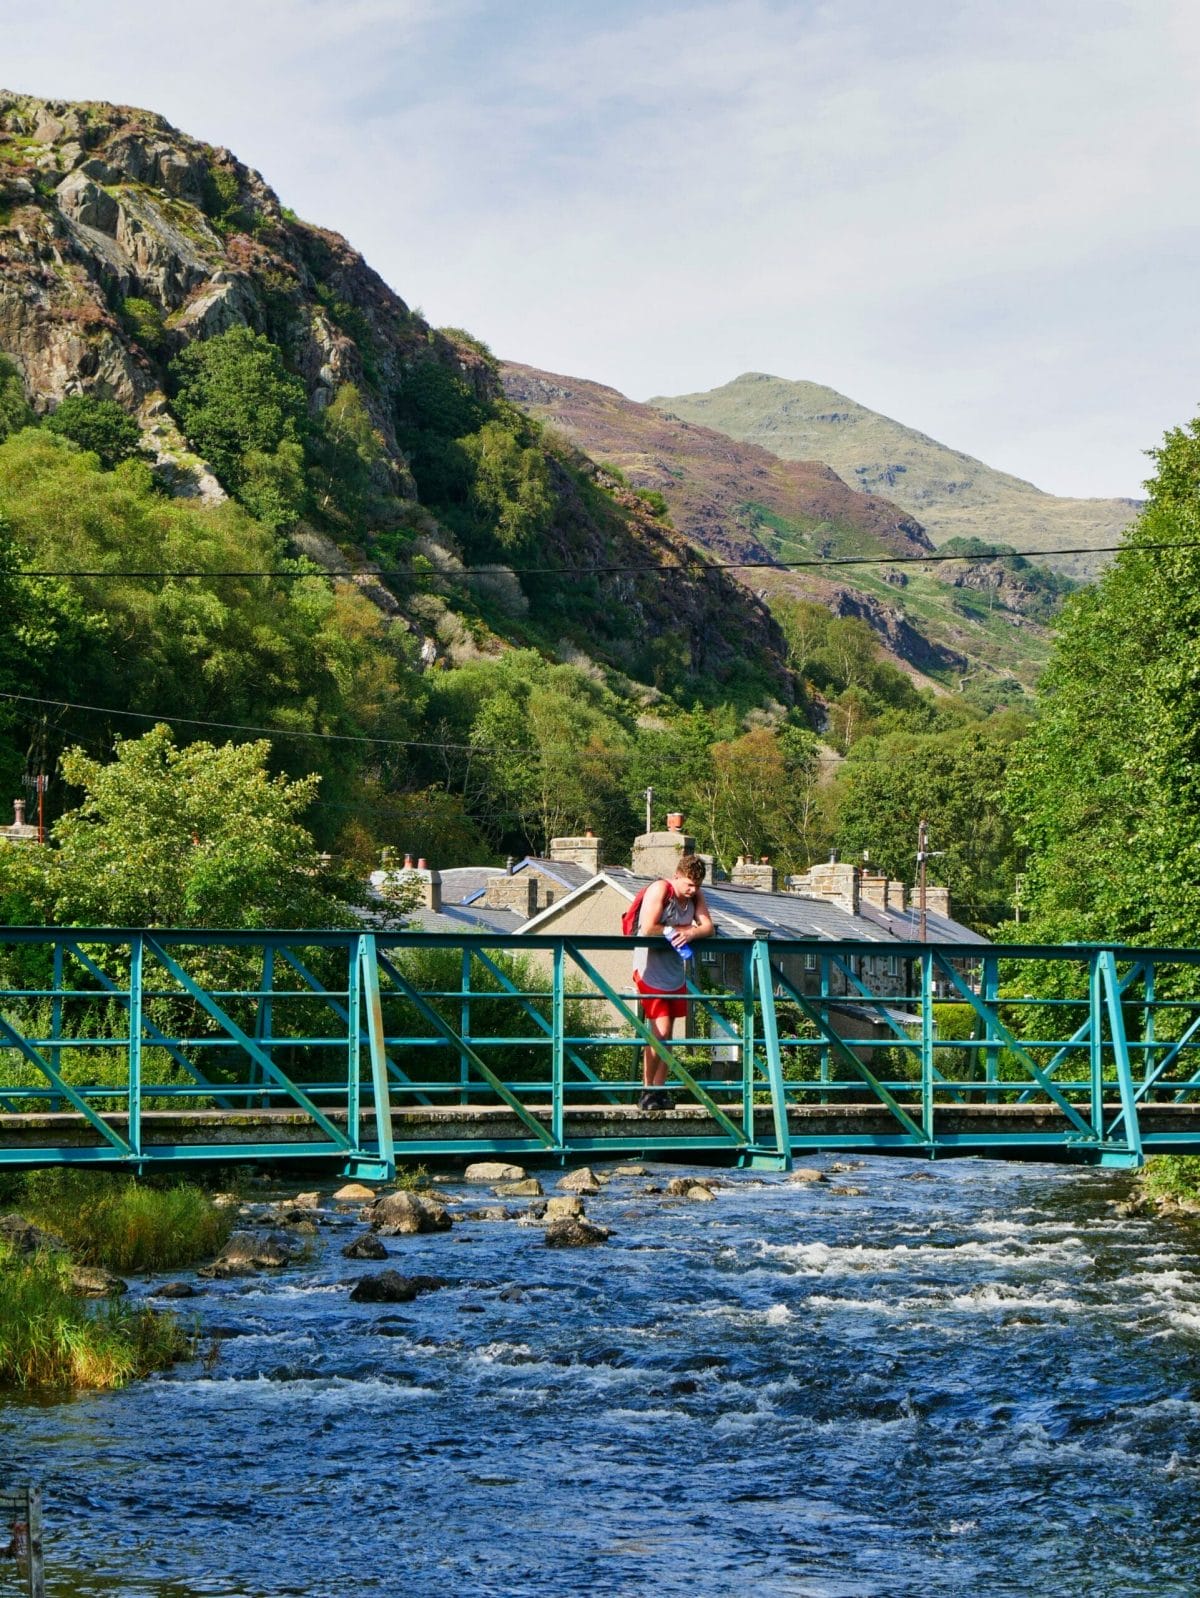 A man on bridge in Beddgelert Wales with a river flowing underneath and hills in the background